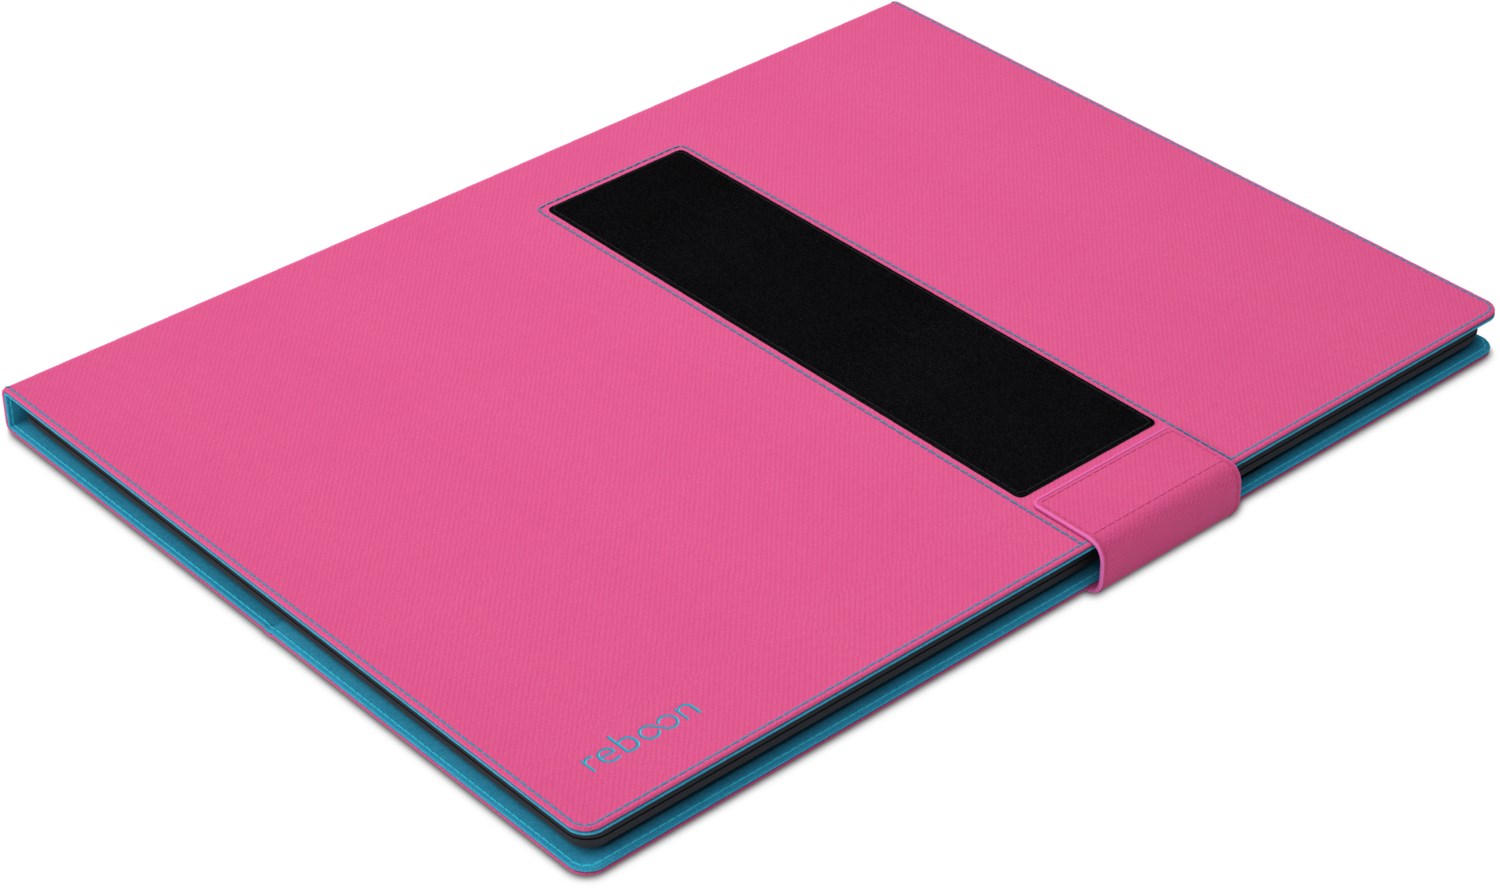 reboon booncover s tablethÃ¼lle pink